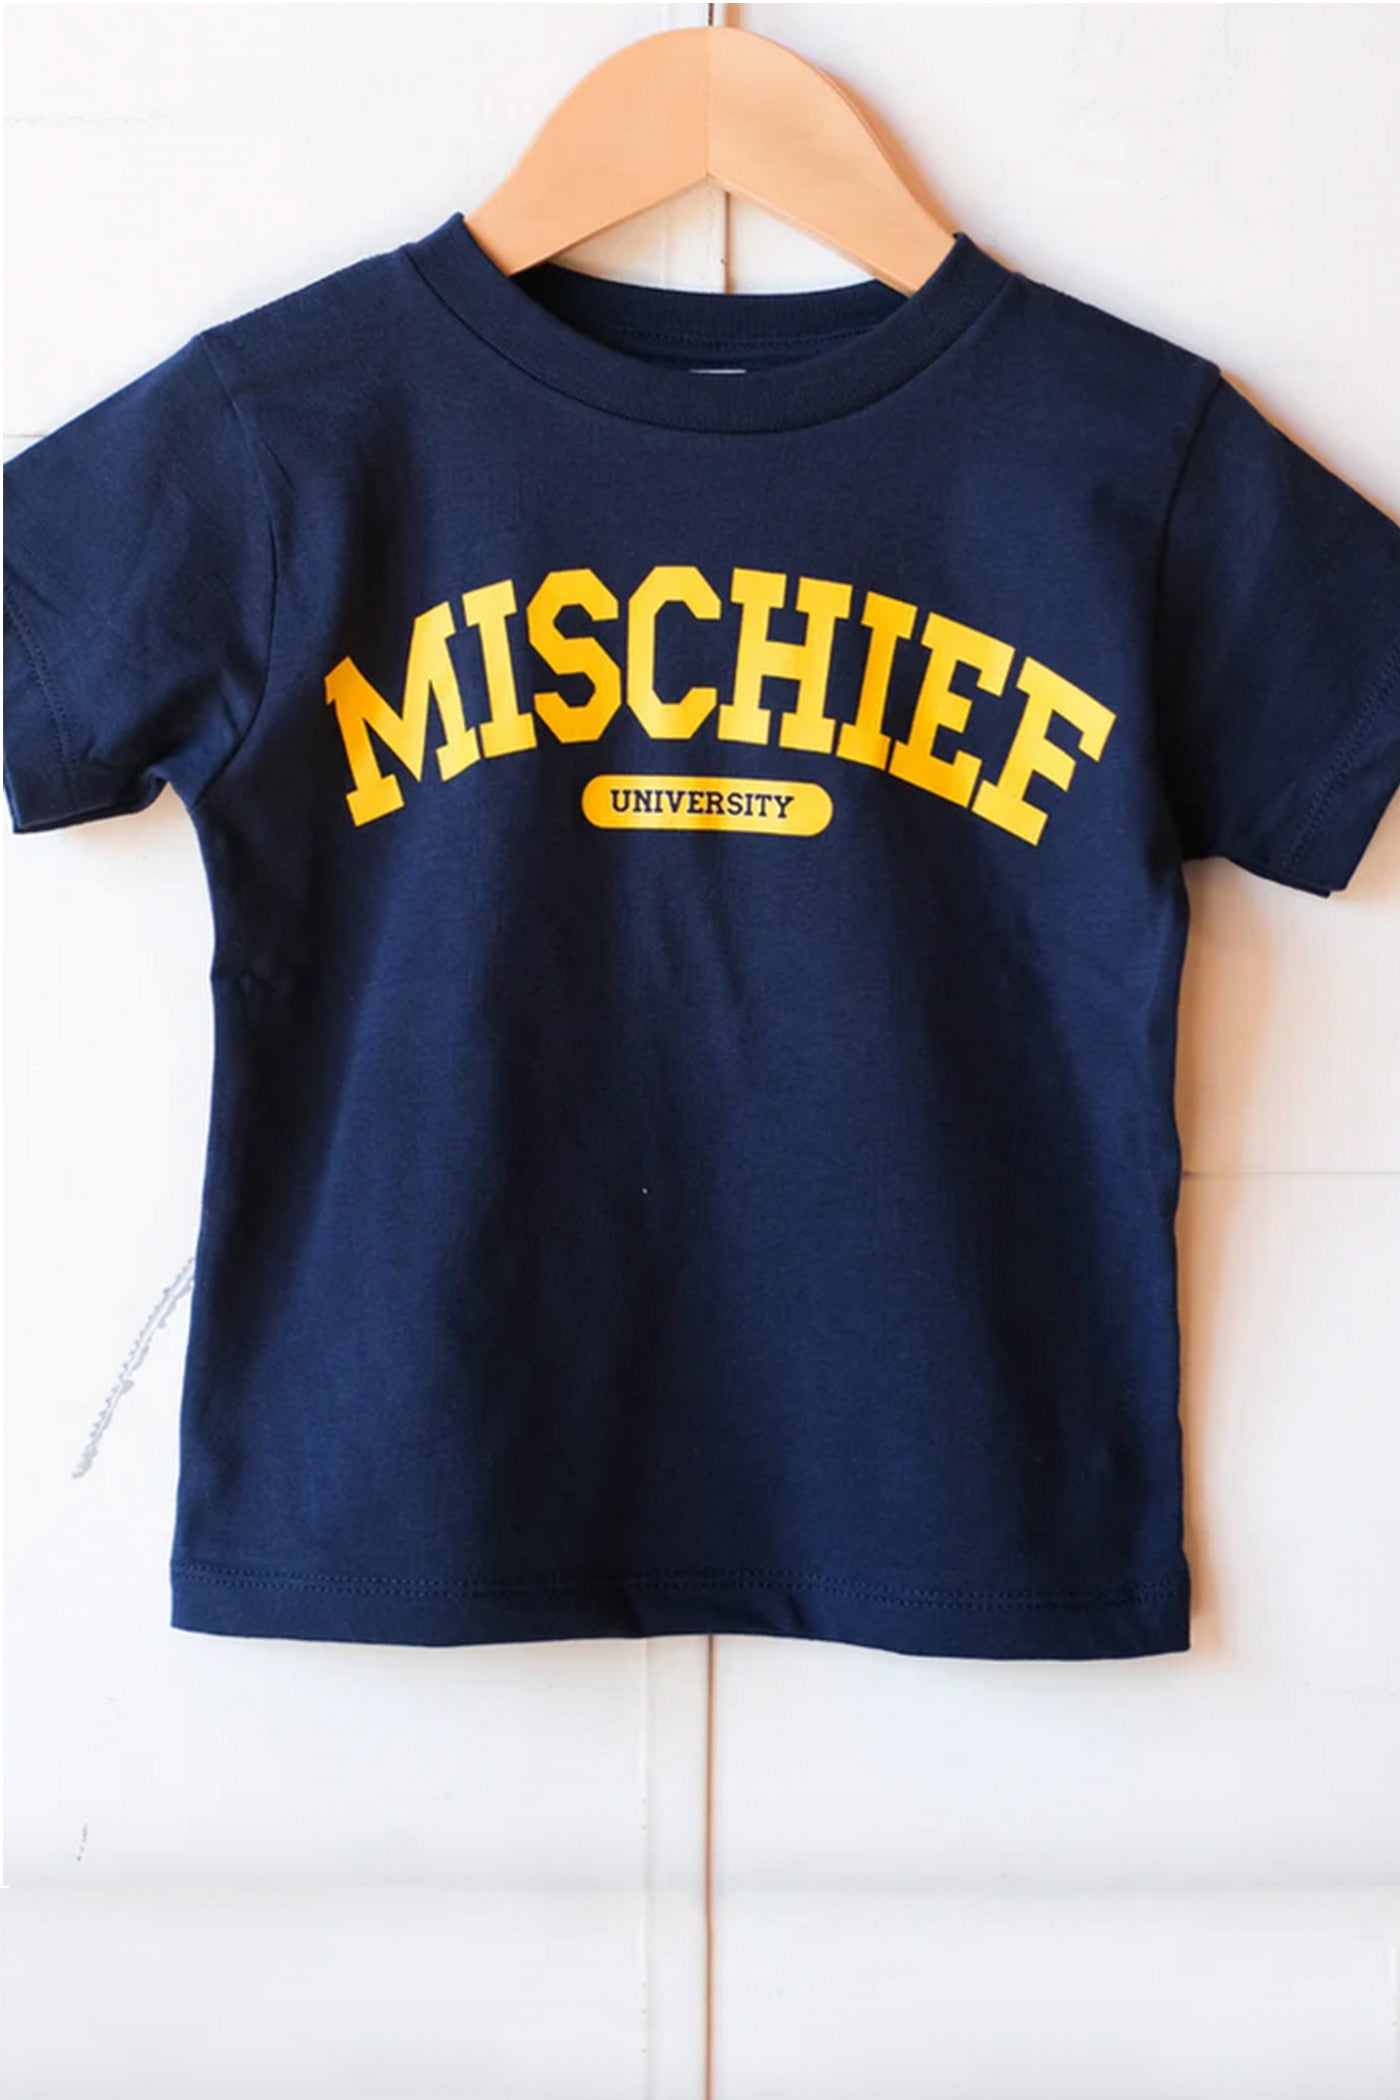 Mischief Univercity Kids Graphic Tee by Ambitious Kids